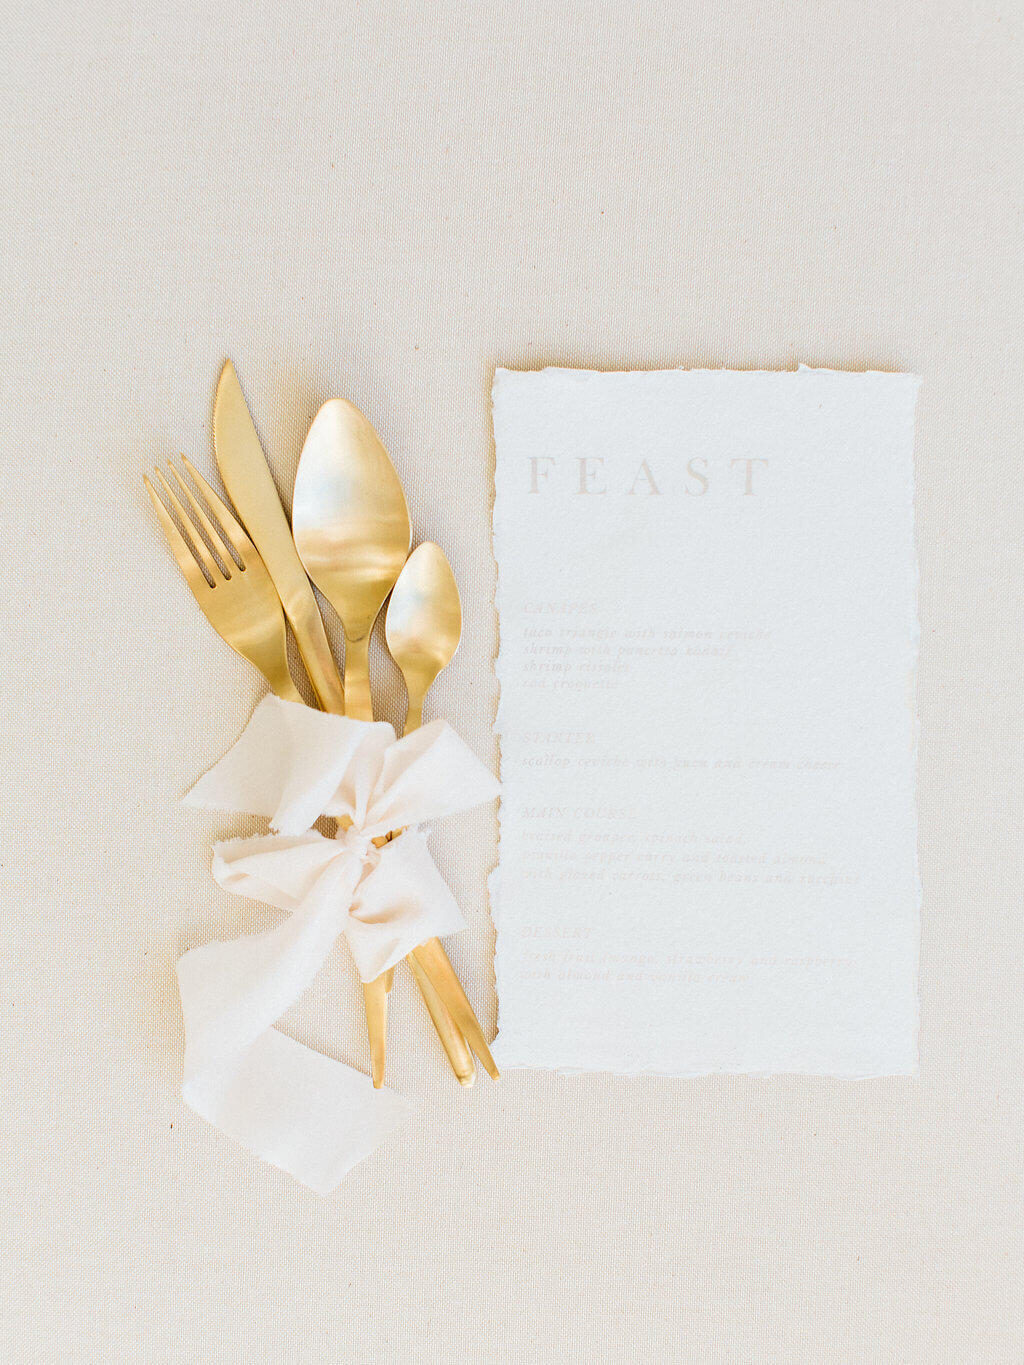 set of gold cutlery and calligraphed paper style by wedidng planner and stylist in portugal , splendida Weddings